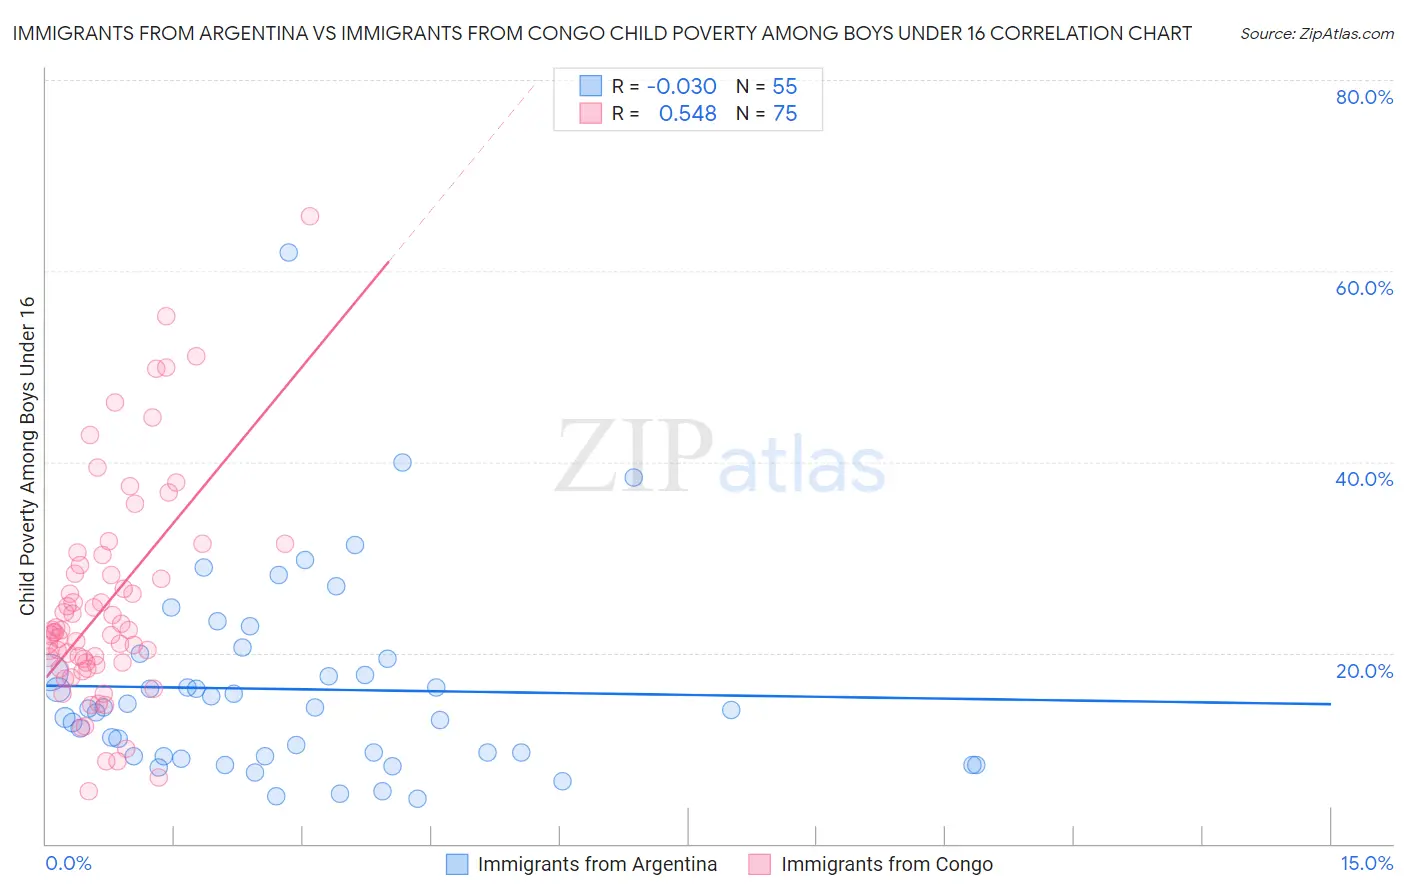 Immigrants from Argentina vs Immigrants from Congo Child Poverty Among Boys Under 16